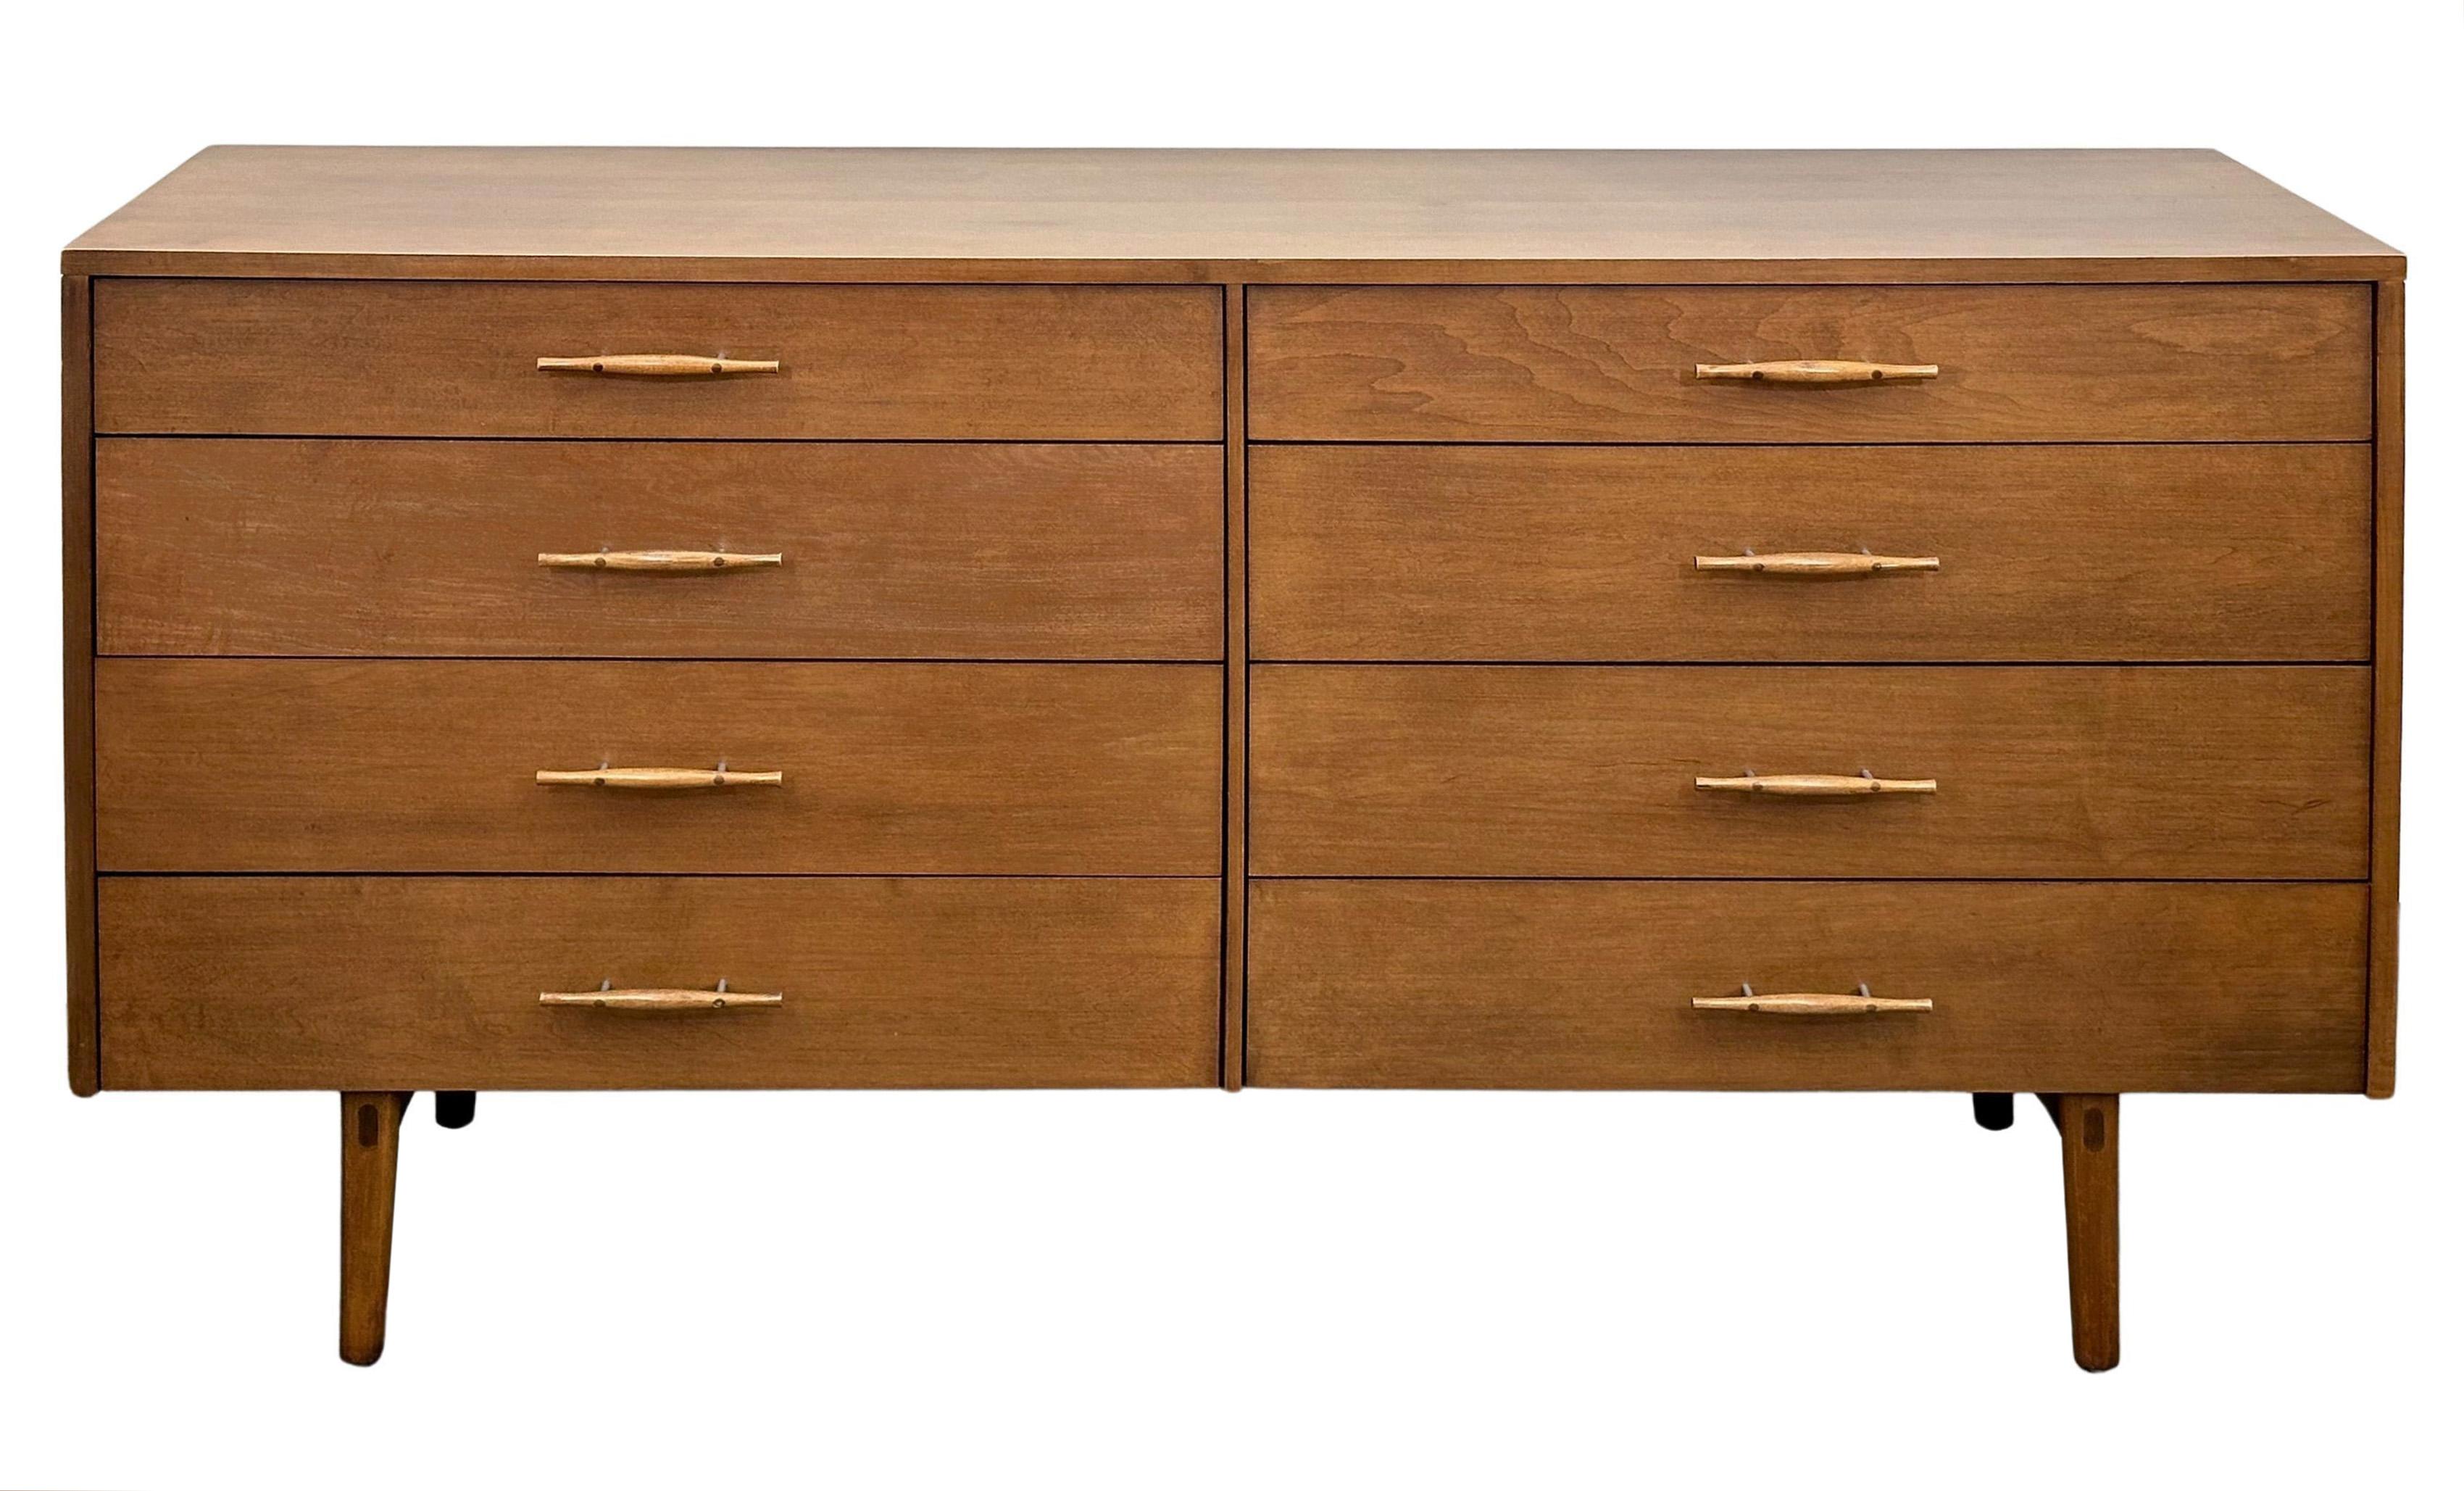 Paul McCobb’s Model 1507-S Planner Group 8-drawer dresser and companion mirror for Winchendon. USA, 1958. 

Extremely rare edition of the 1507-S dresser with special 